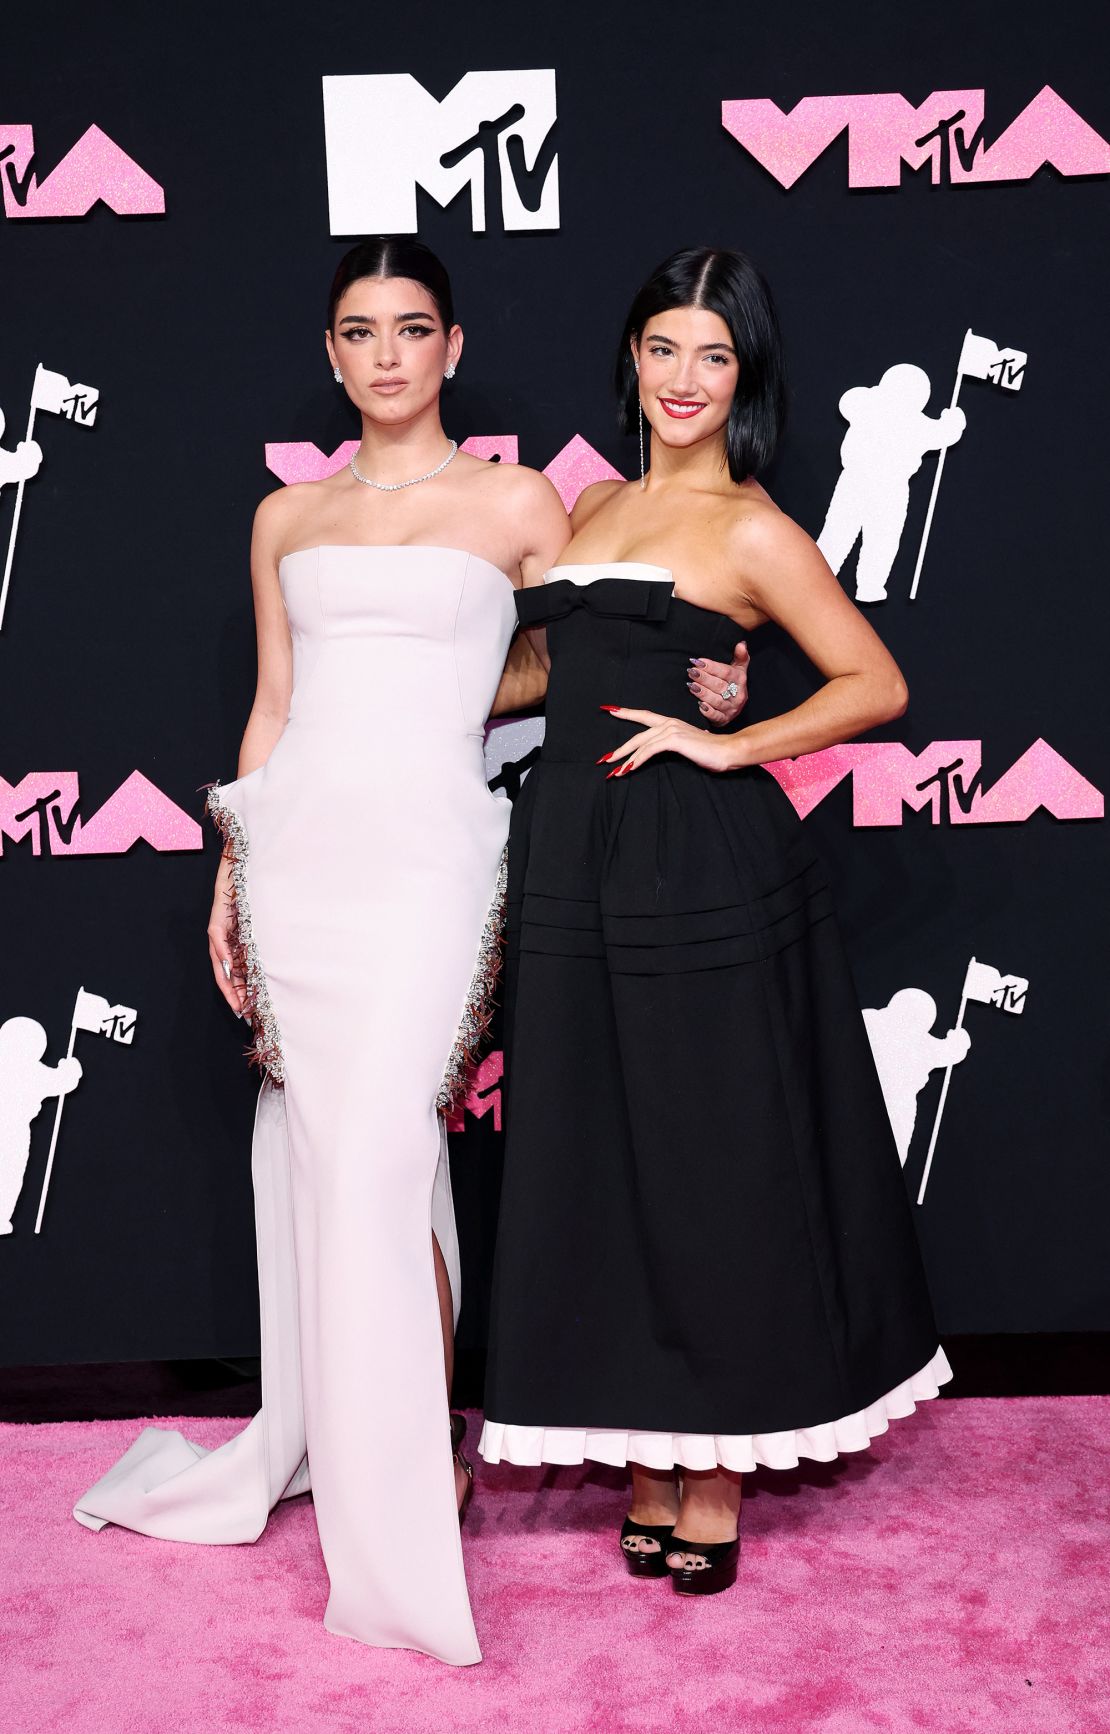 TikTok stars Dixie and Charli D'Amelio were a contrasting and complementary pair, with Dixie (left) in a white strapless Maticevski mermaid dress and Charli (right) in a black dress with playful white trim.